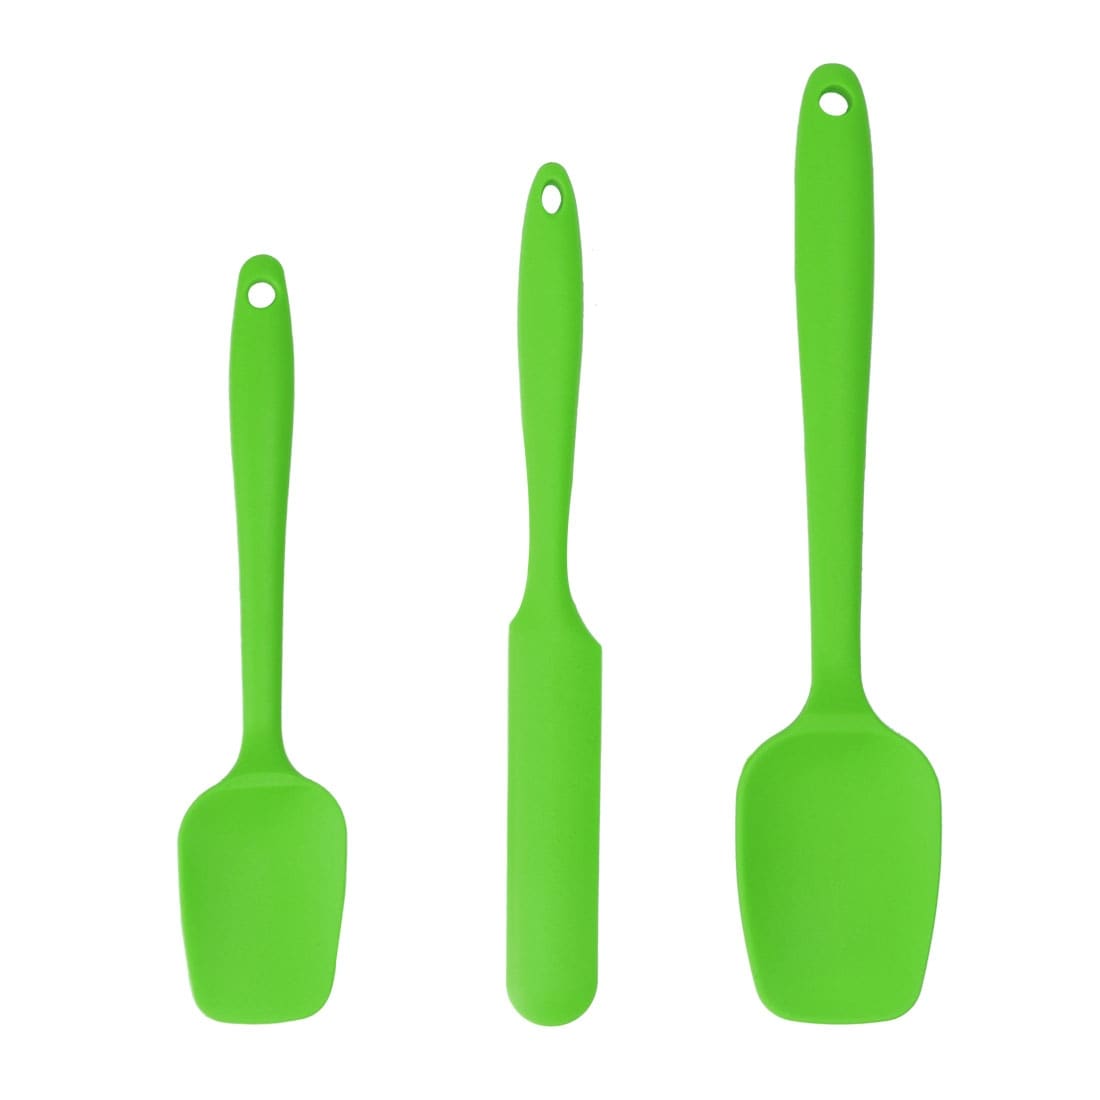 Unique Bargains Kitchen Tong Set Silicone Tips Non-Stick Cooking Tongs 3Pcs  Green